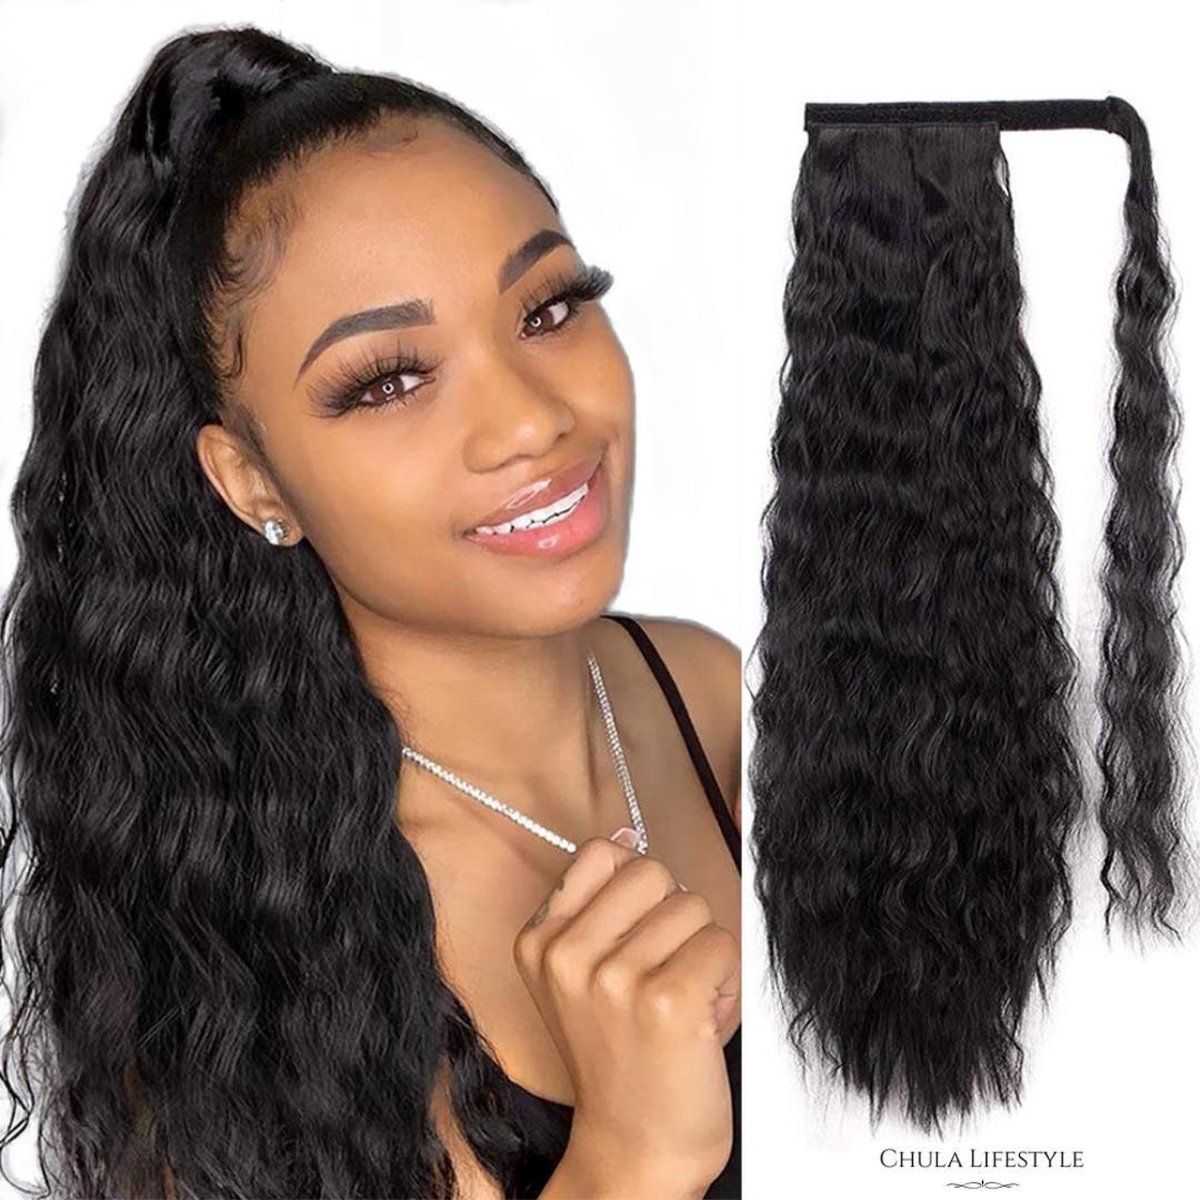 Chula Lifestyle Paardenstaart Haar Extension Zwart Lang Krullend Golvend 56 cm - Ponytail Extensions Black Long Curly Wavy 22 inch